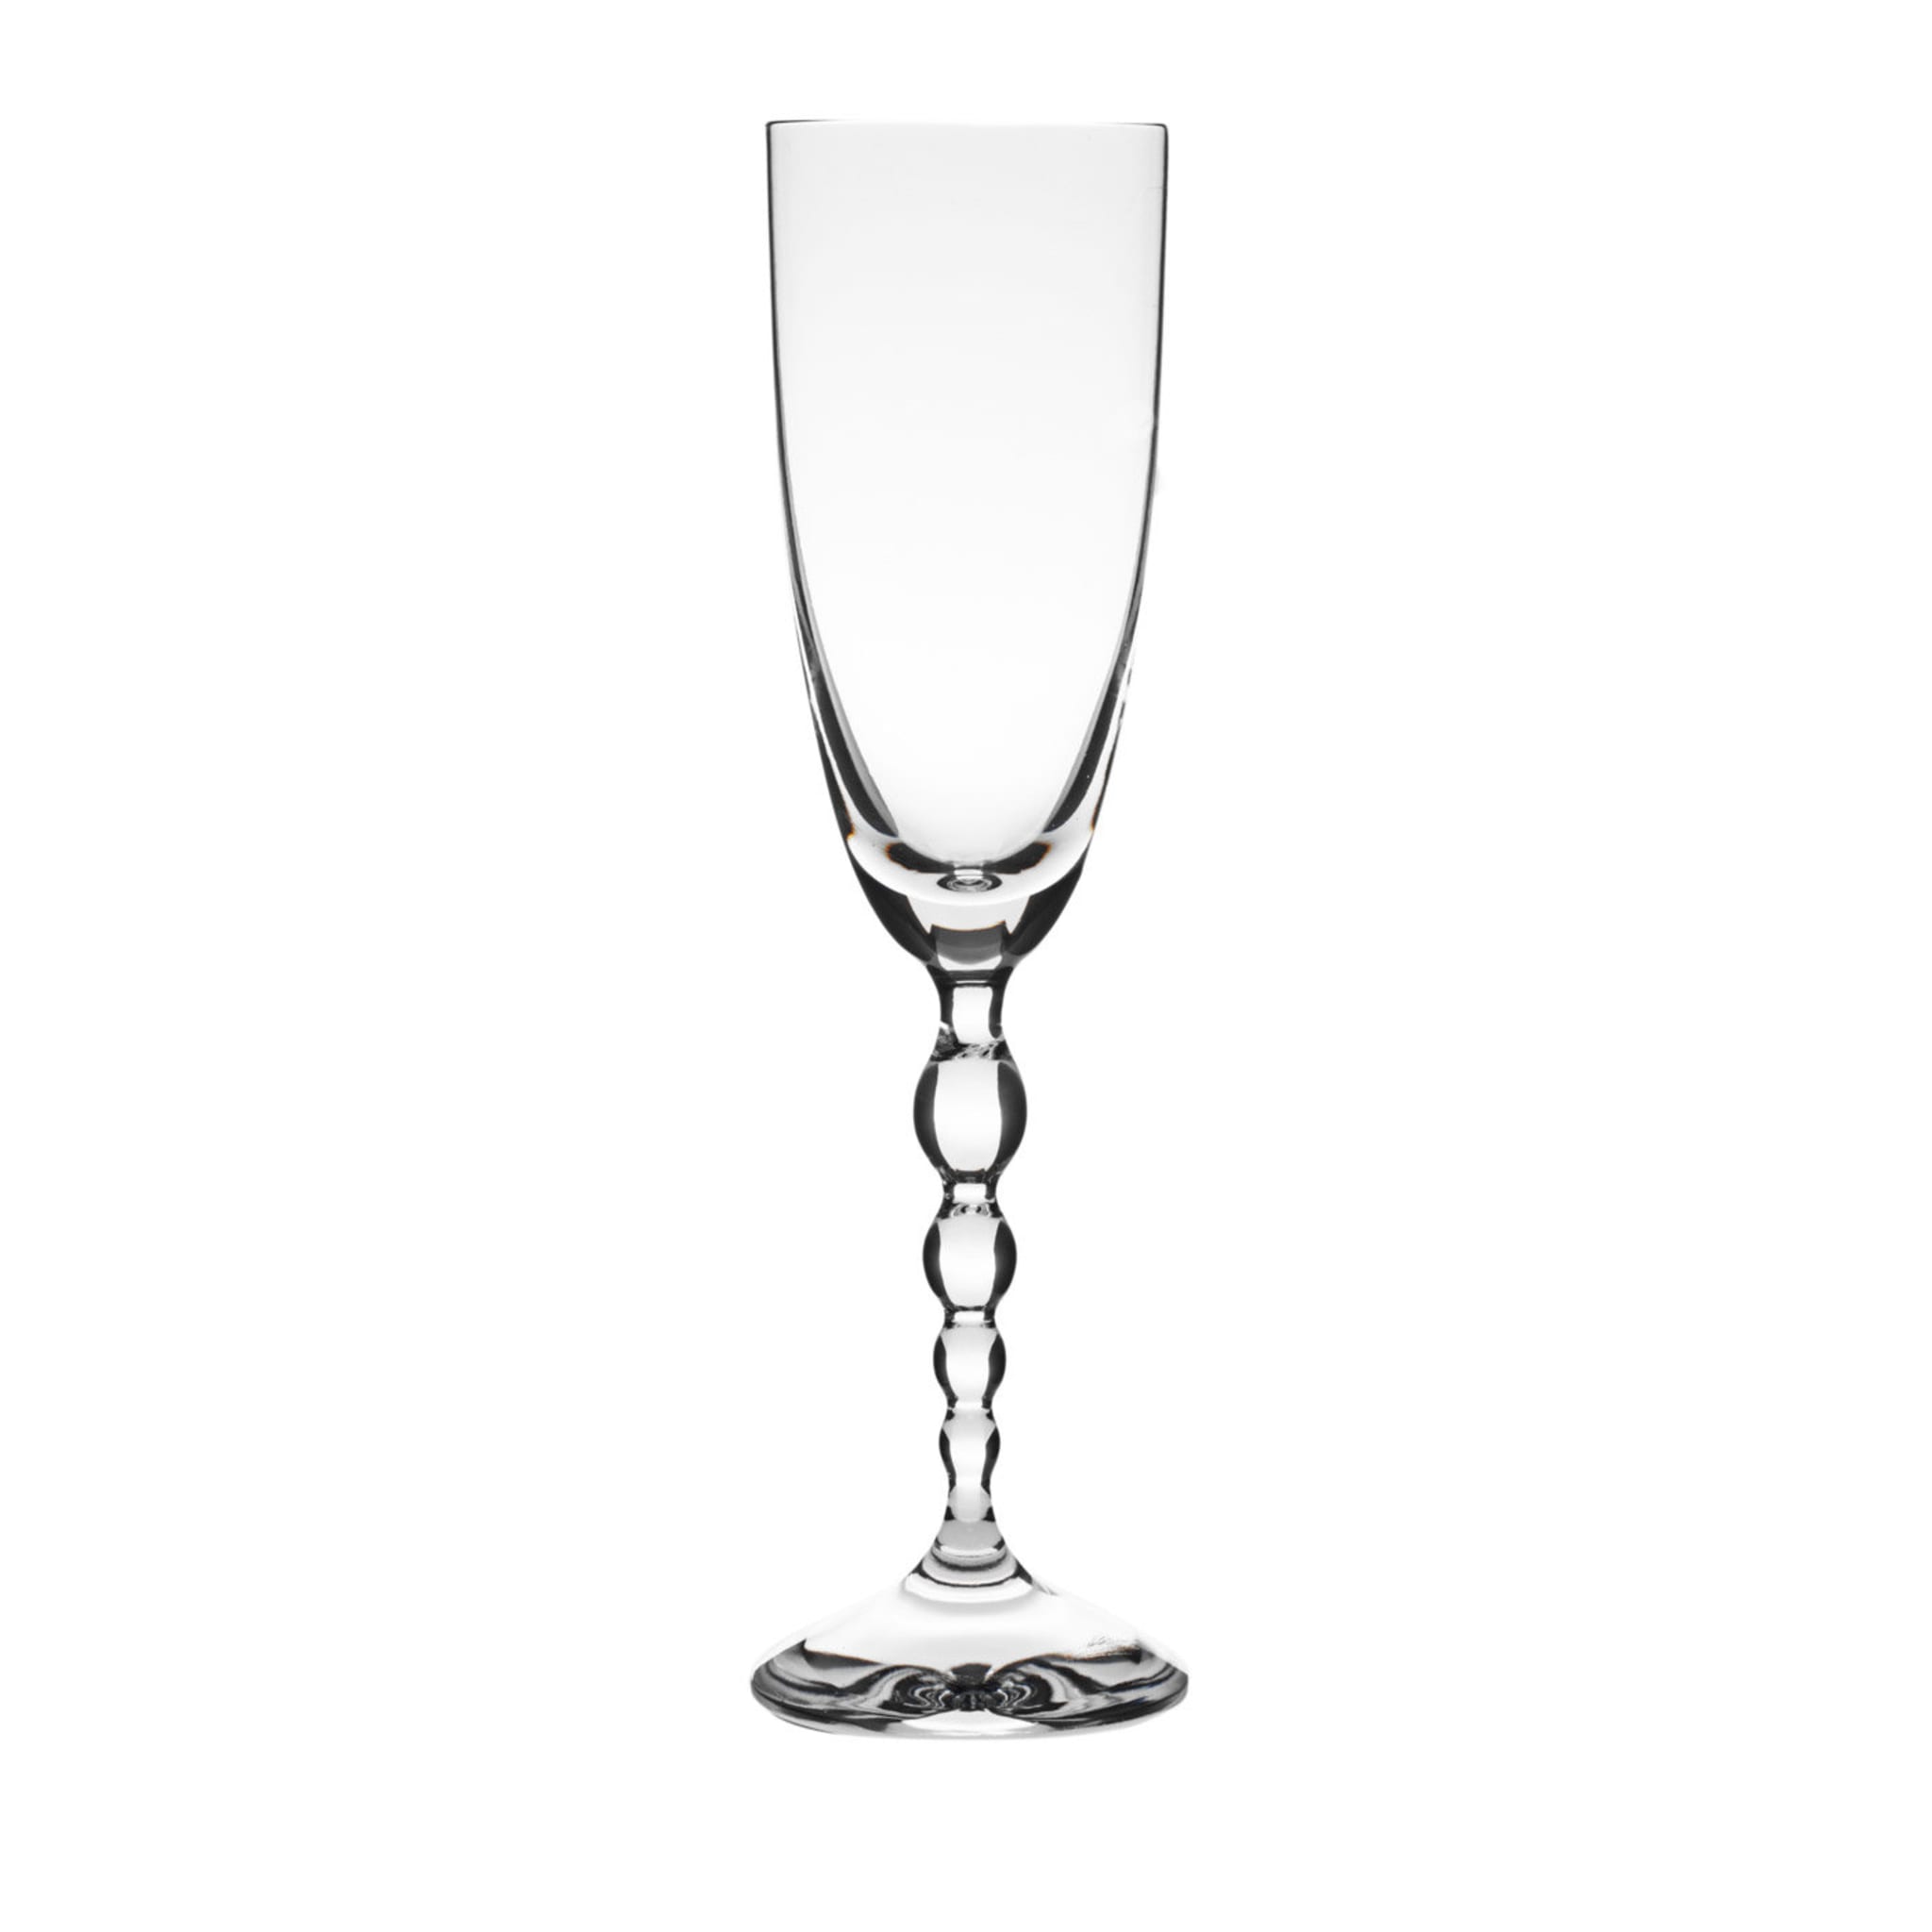 Set of 6 Collier Crystal Flutes - Main view